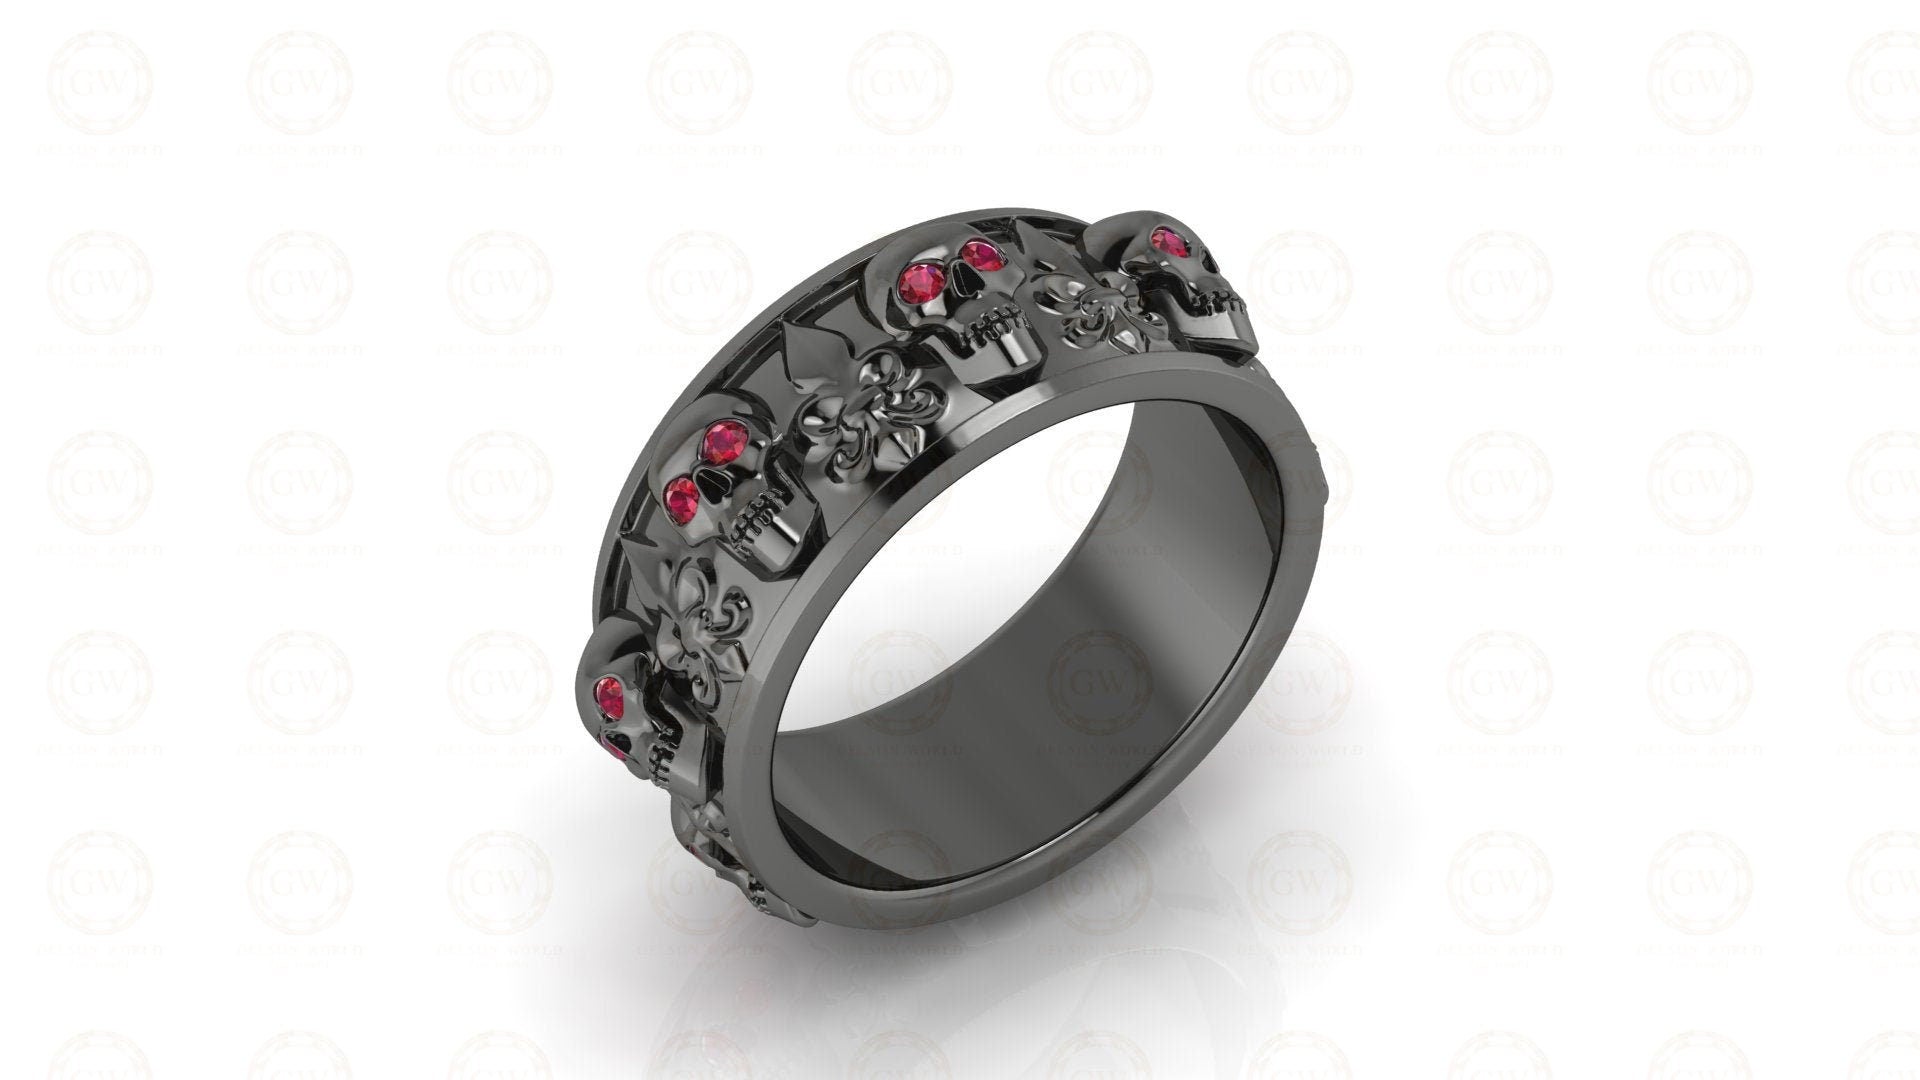 8 mm Wide Unique Gothic Skull Wedding Band, heraldic lily, Birthstone Ring, July Ruby gemstone ring, Promise Ring, Silver Eternity Band